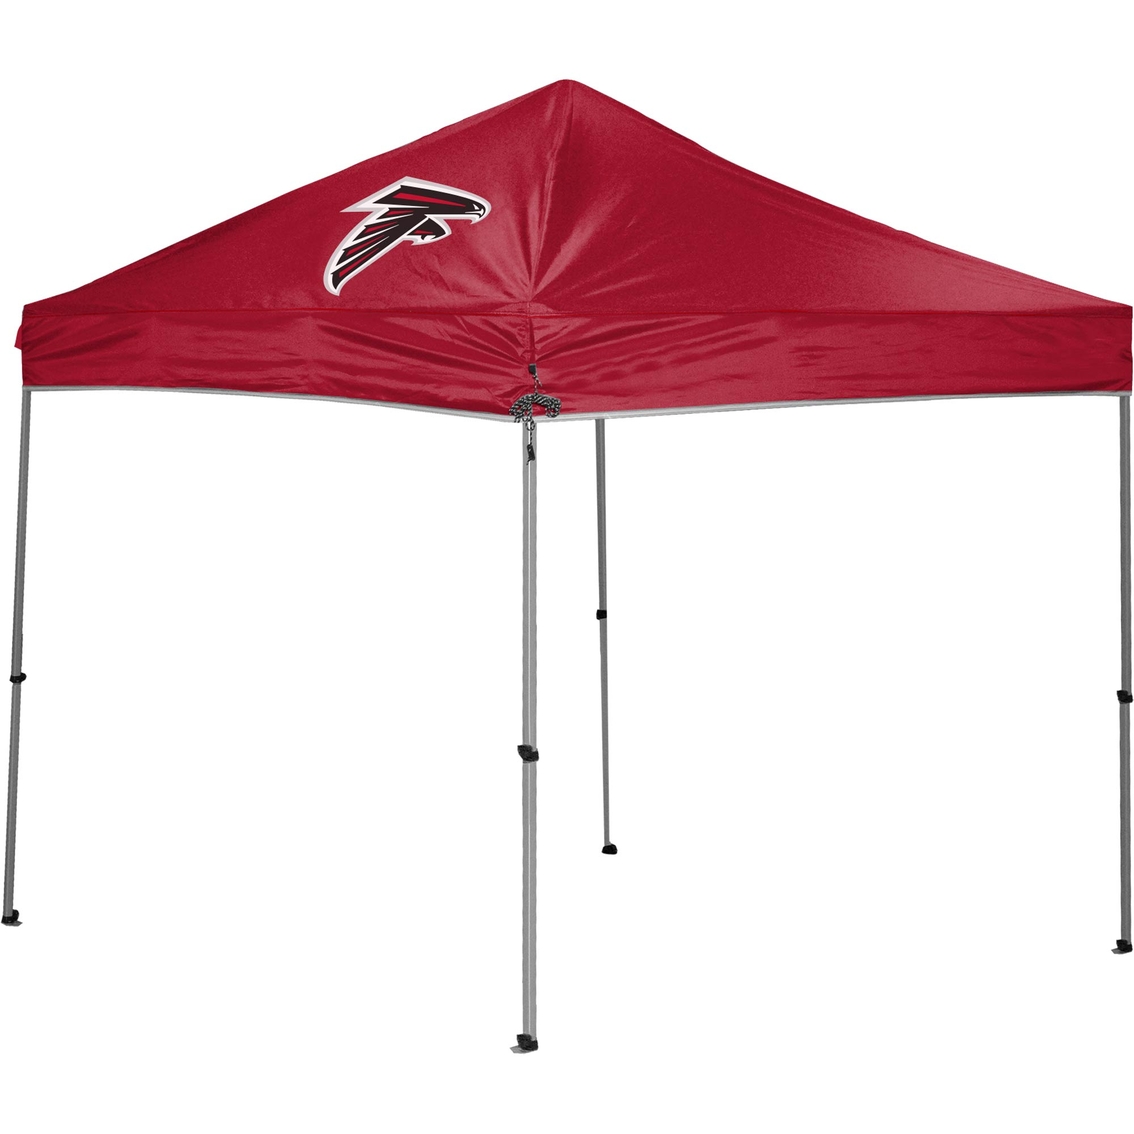 9 x 9 Canopy 4 Chairs Jarden Sports Licensing NCAA Alabama Crimson Tide Tailgate Kit 1 Table 